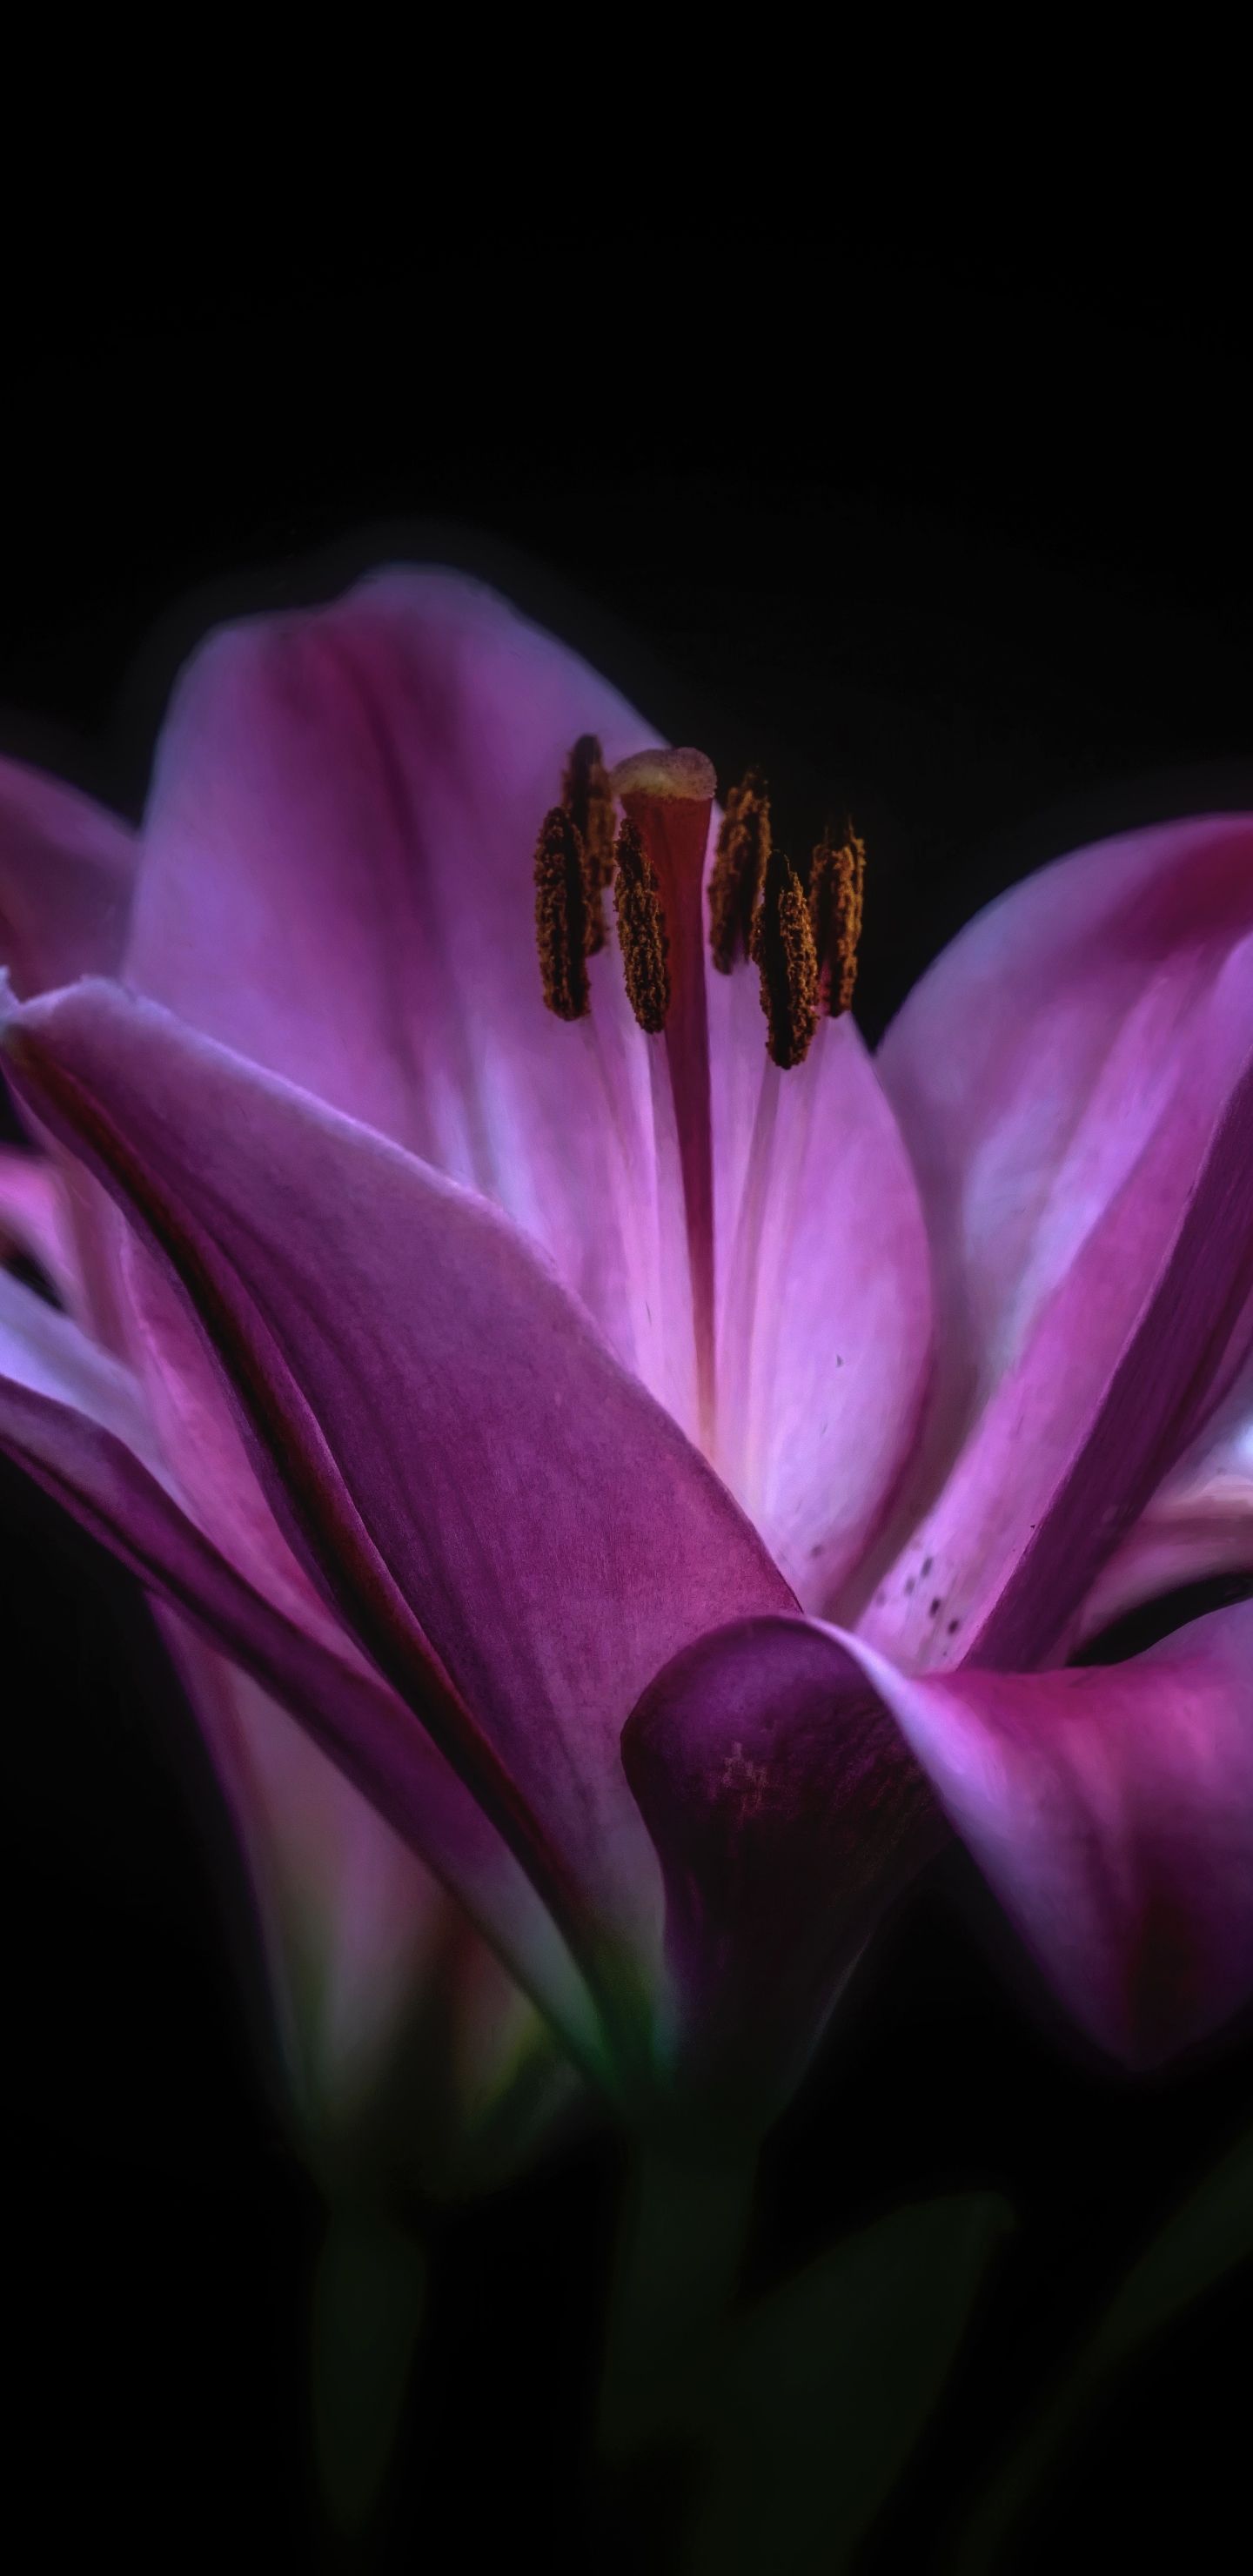 Earth Lily (1440x2960) Wallpaper